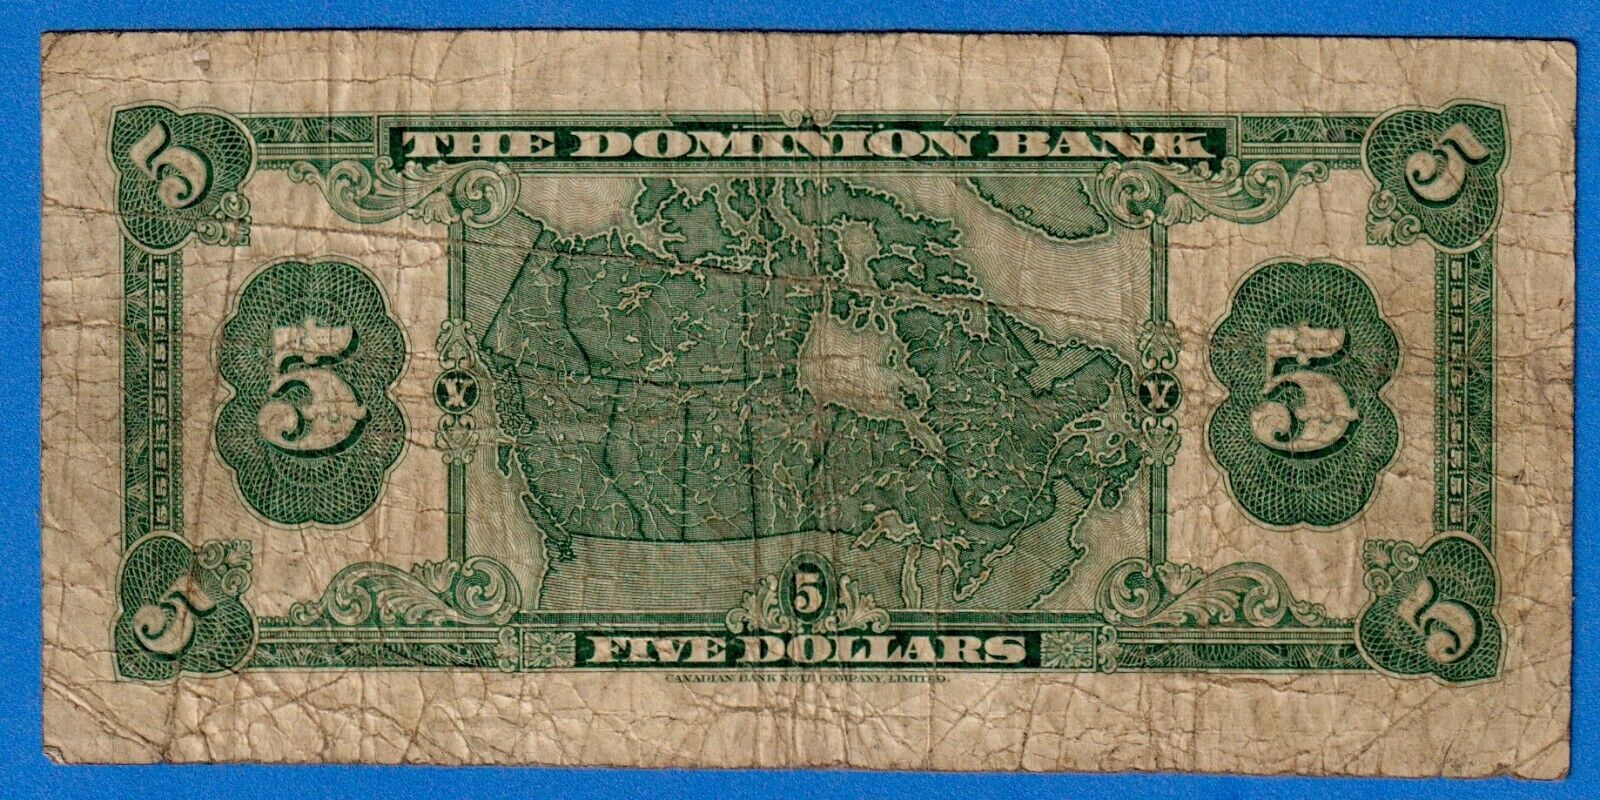 1935 The Dominion Bank $5 P-S1033 Circulated Note - 165434